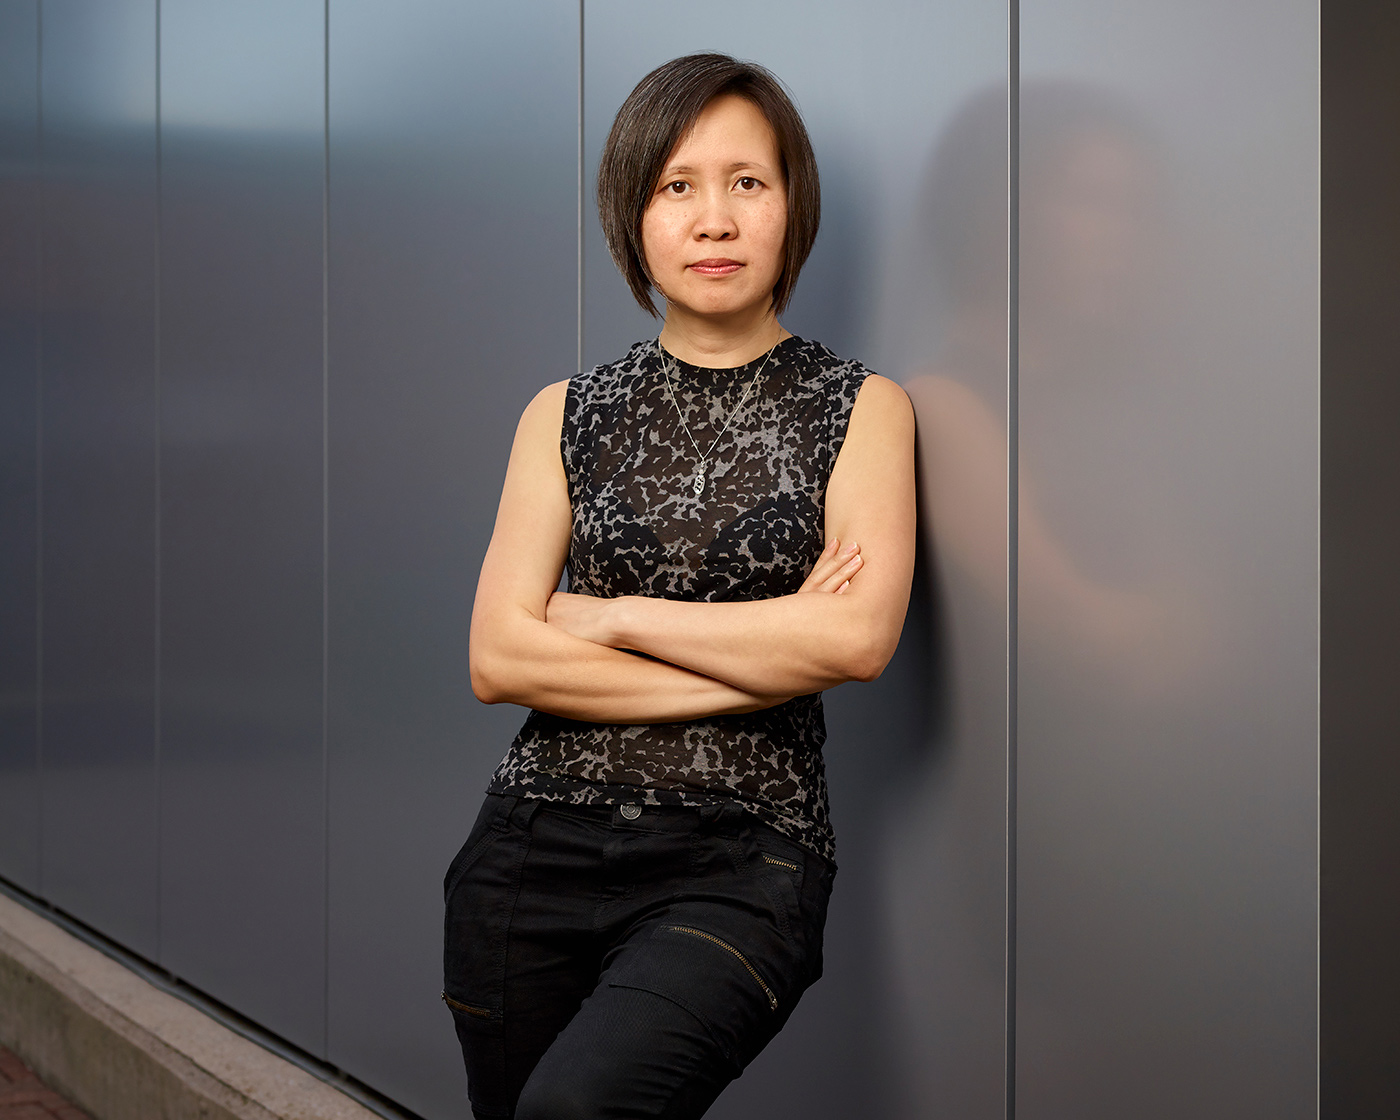 Image of cinematographer Iris Ng leaning against a wall with her arms folded.